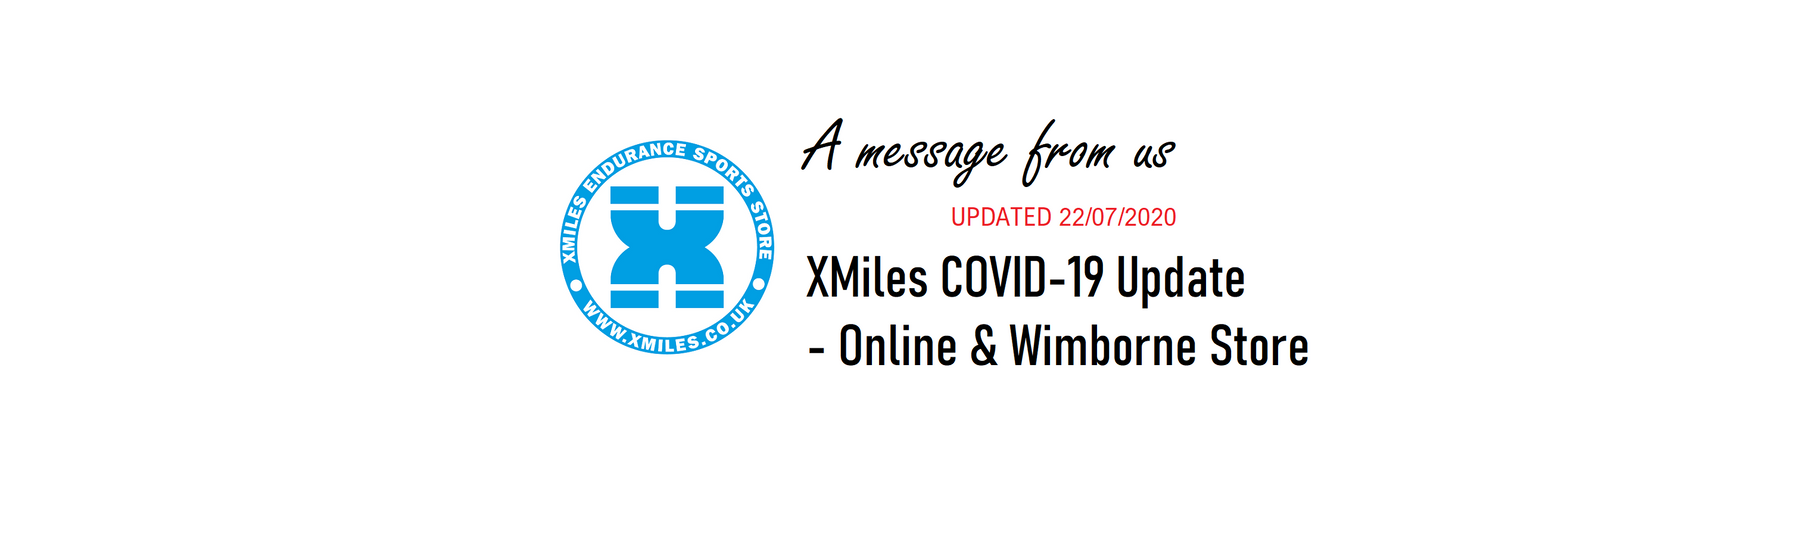 A message from us | XMiles COVID-19 Update